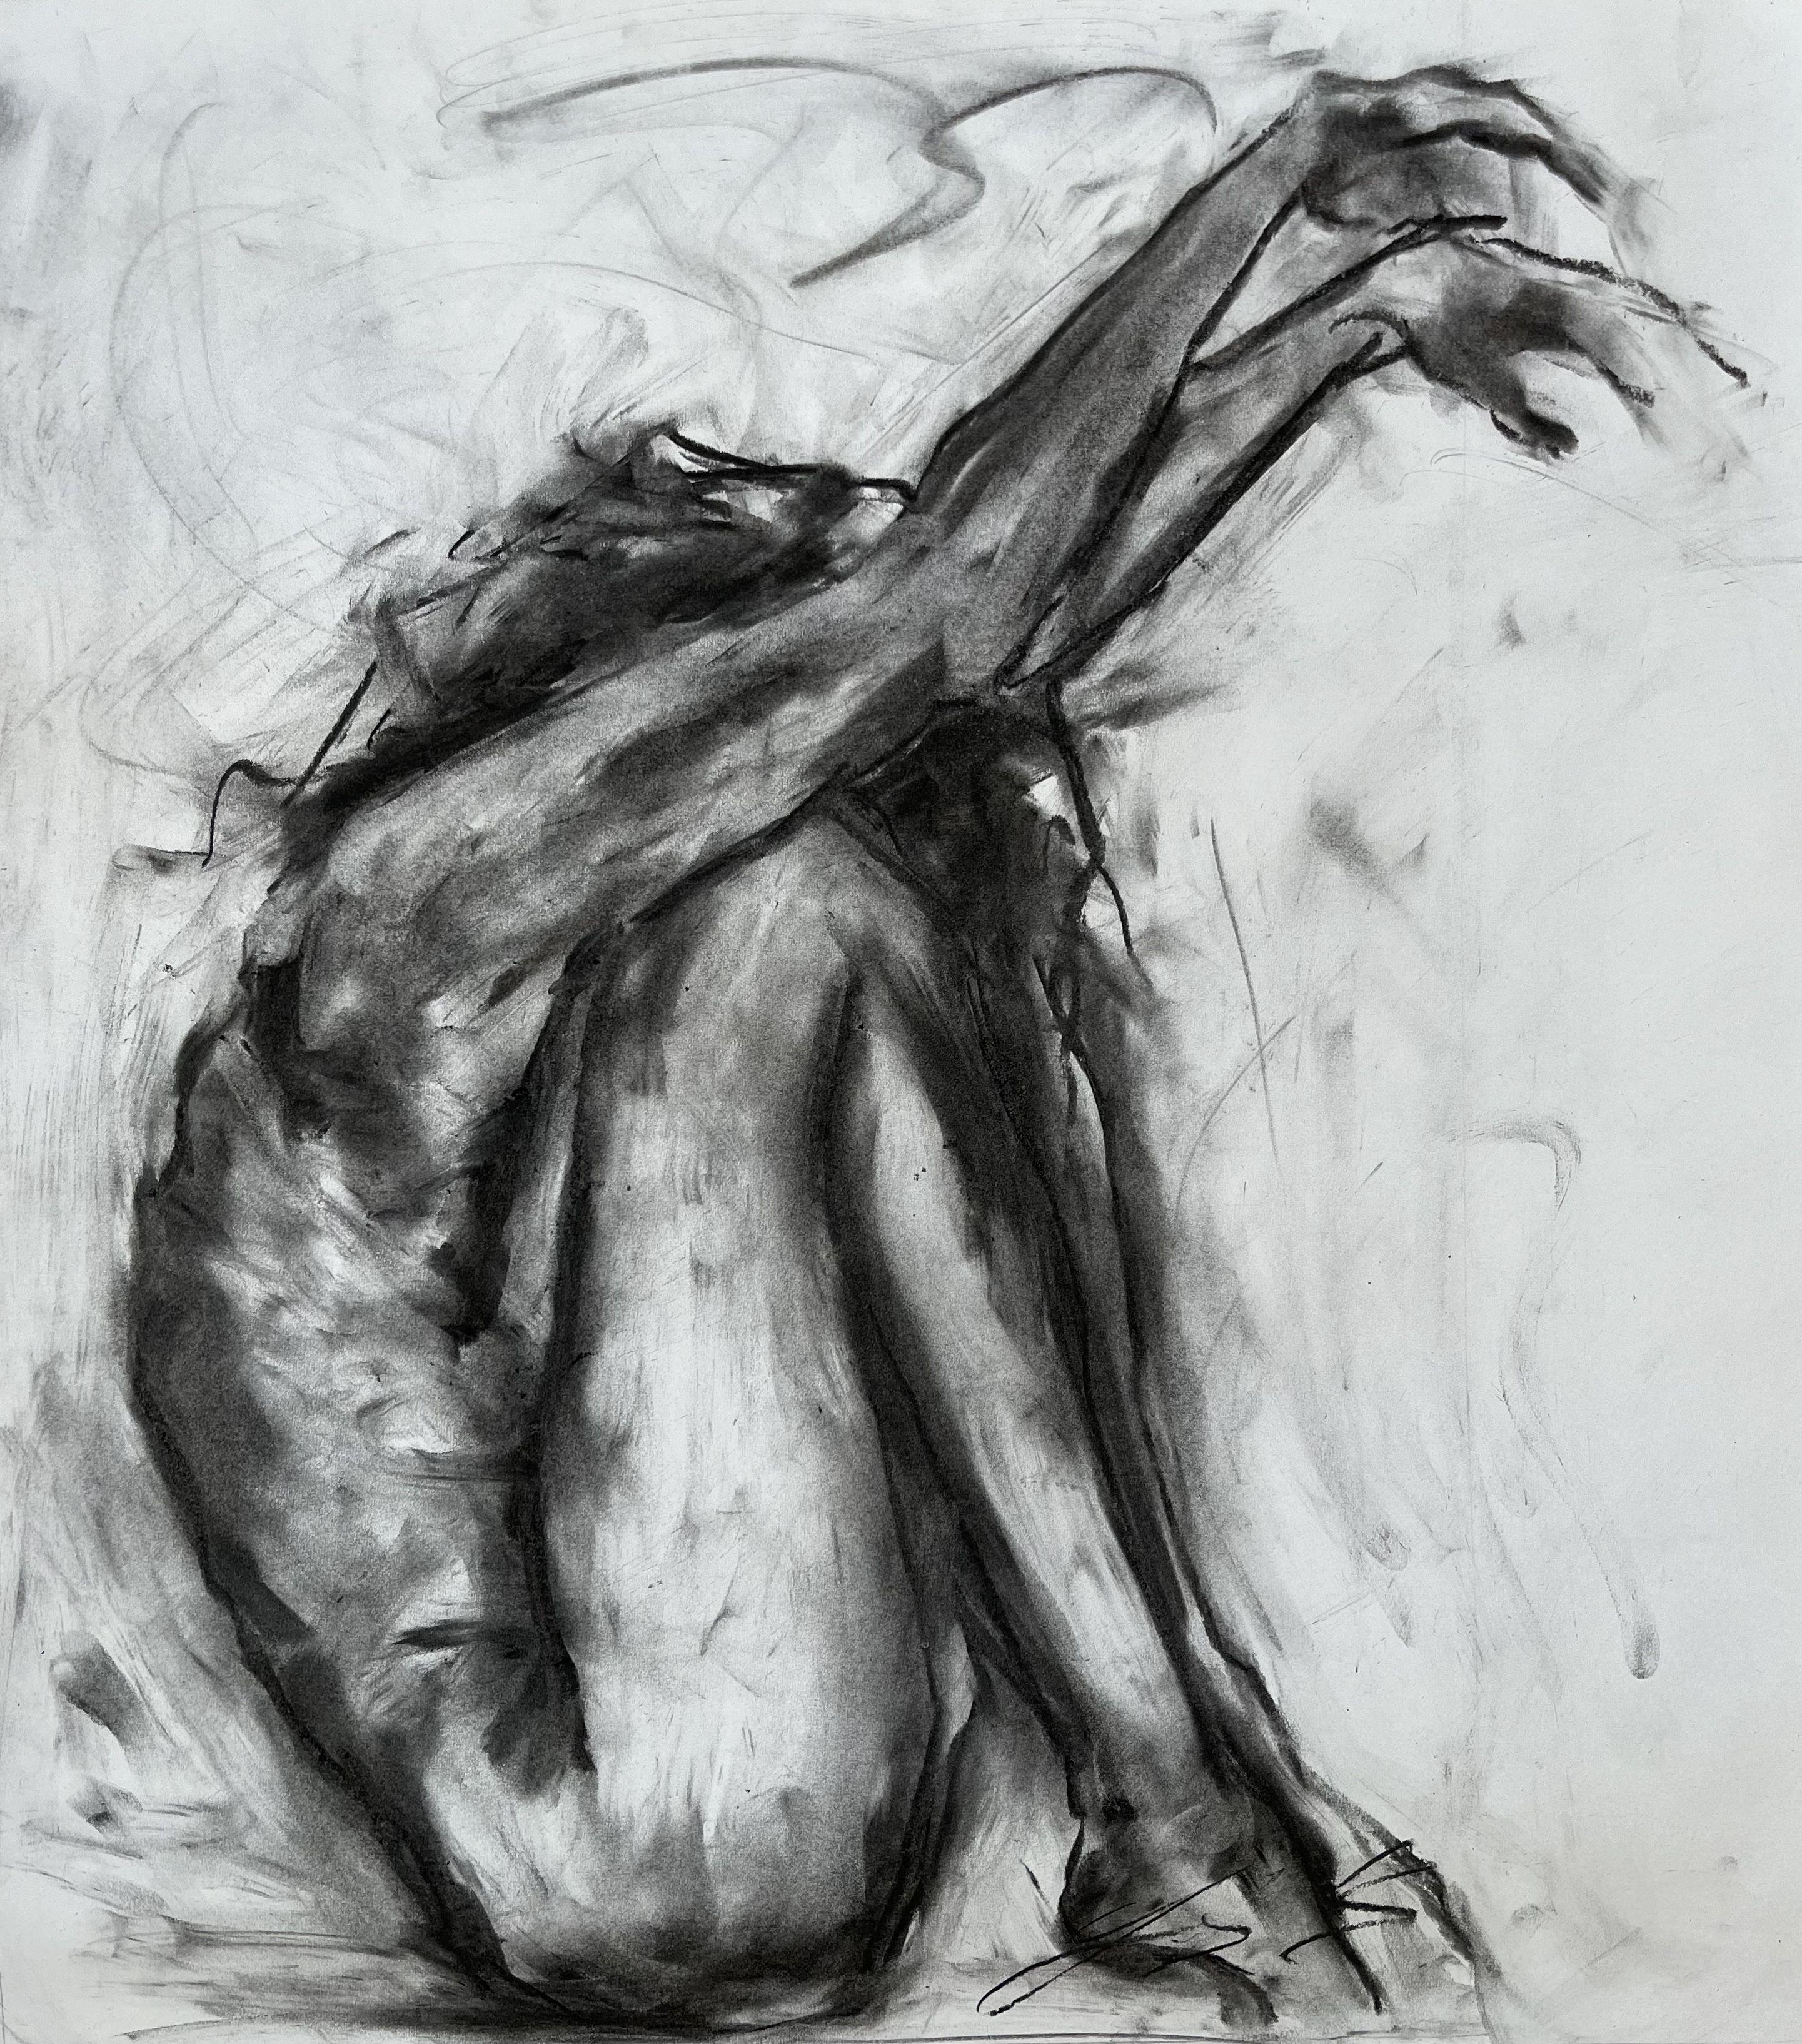 Drama, Drawing, Charcoal on Paper - Art by James Shipton